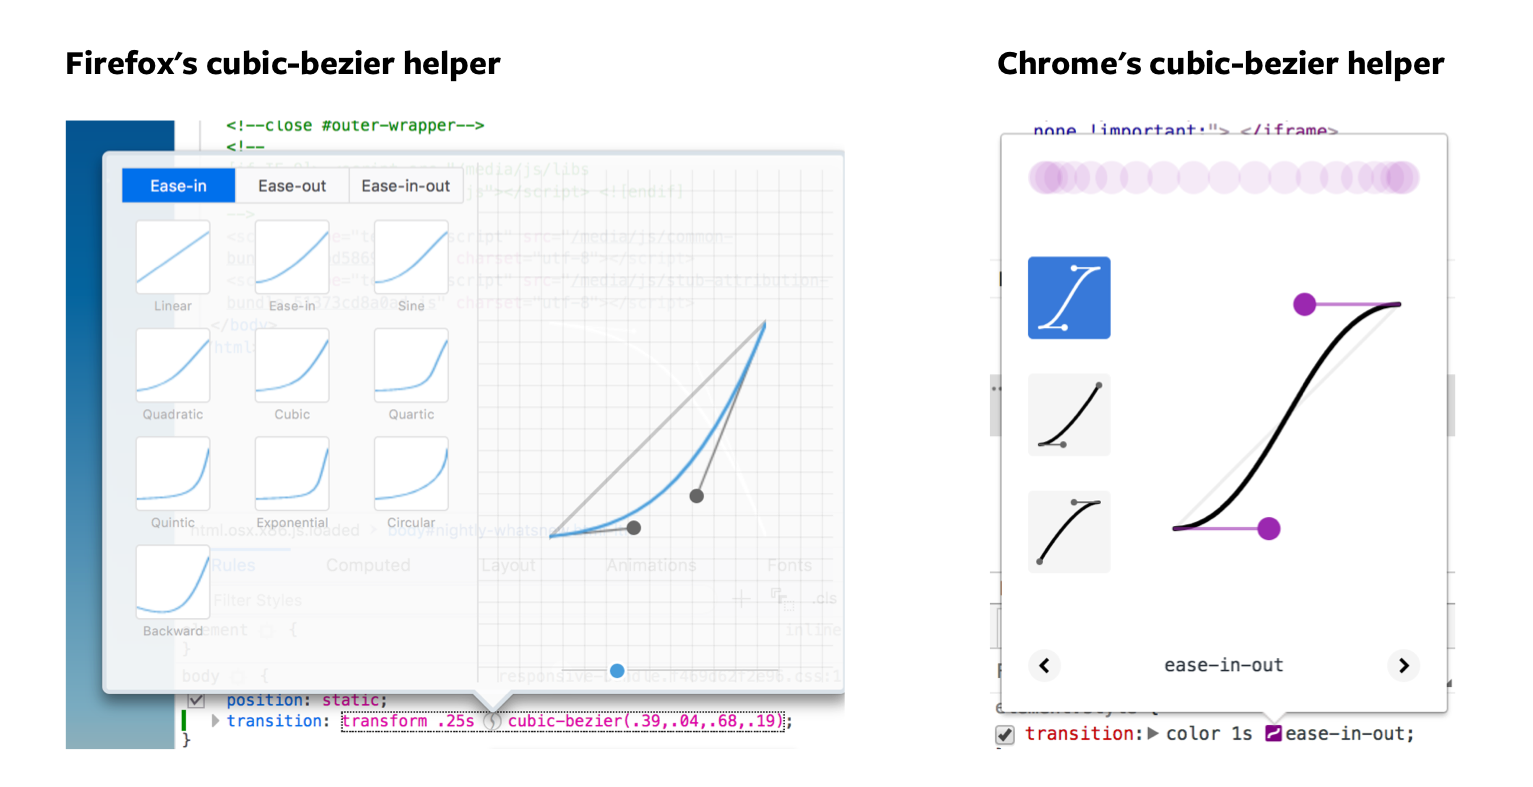 Both Chrome and Firefox provides you with a cubic-bezier tool